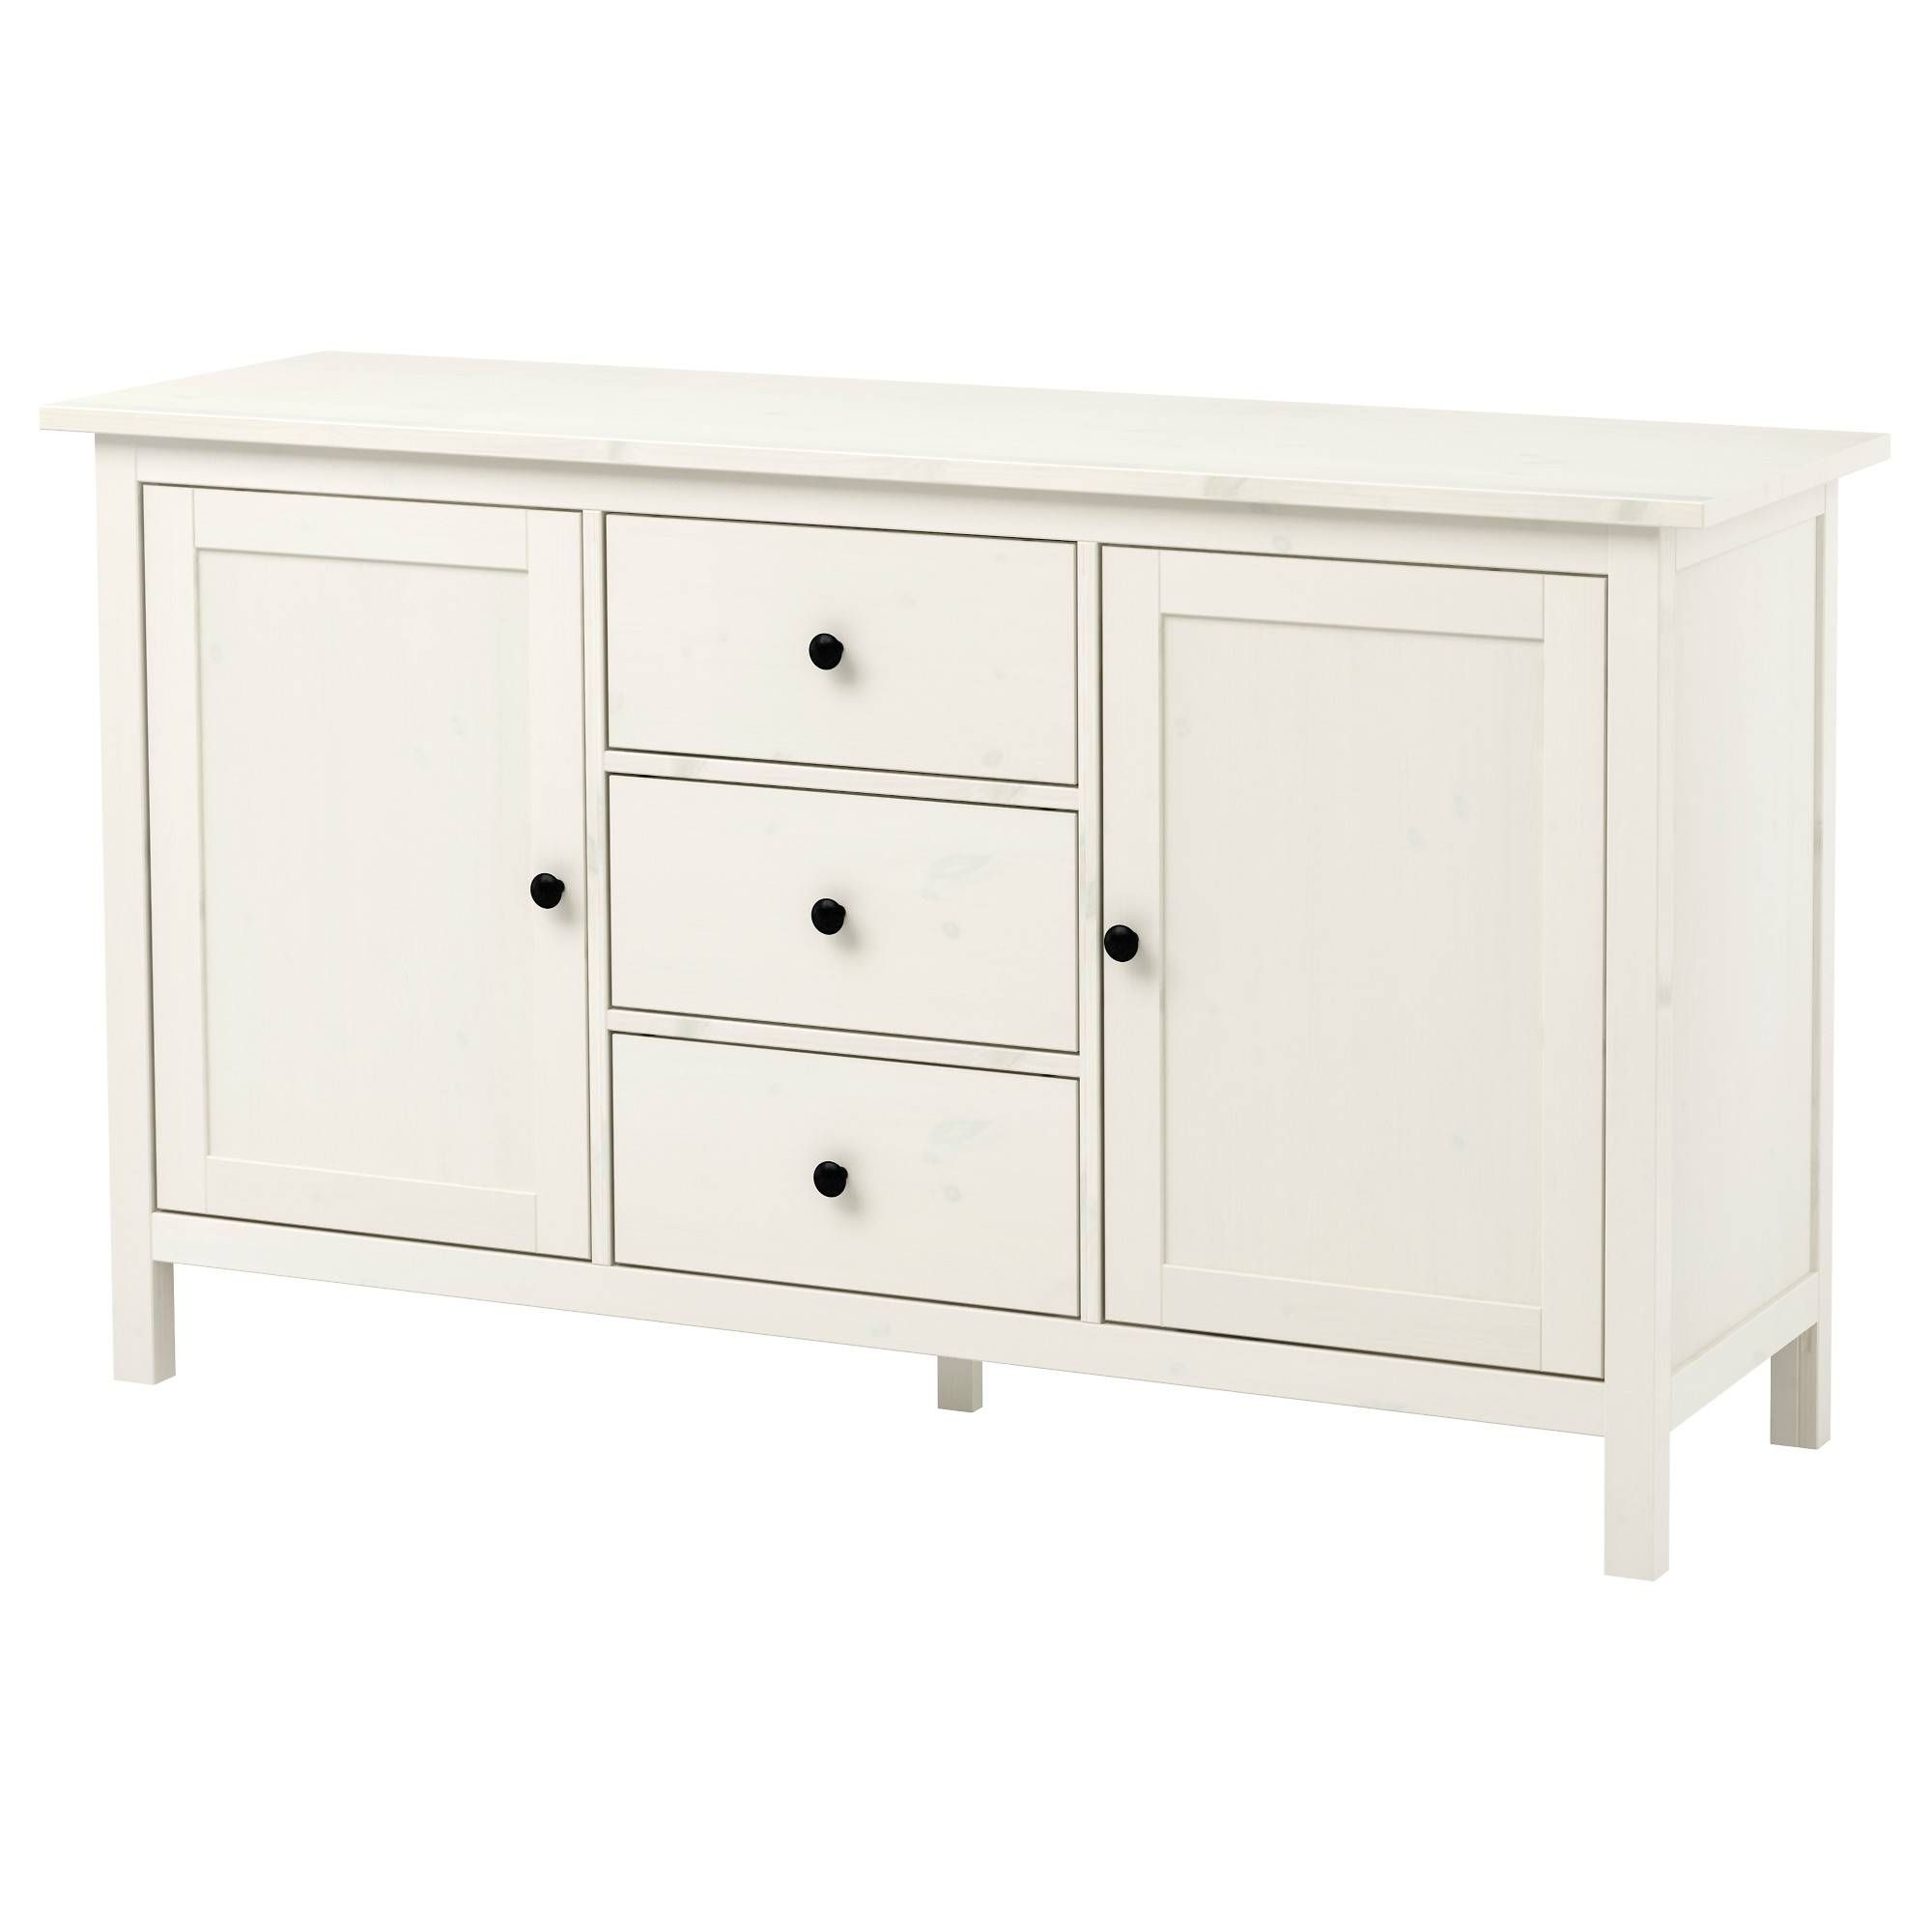 Hemnes Sideboard – White Stain – Ikea For Shallow Buffet Sideboards (View 3 of 15)